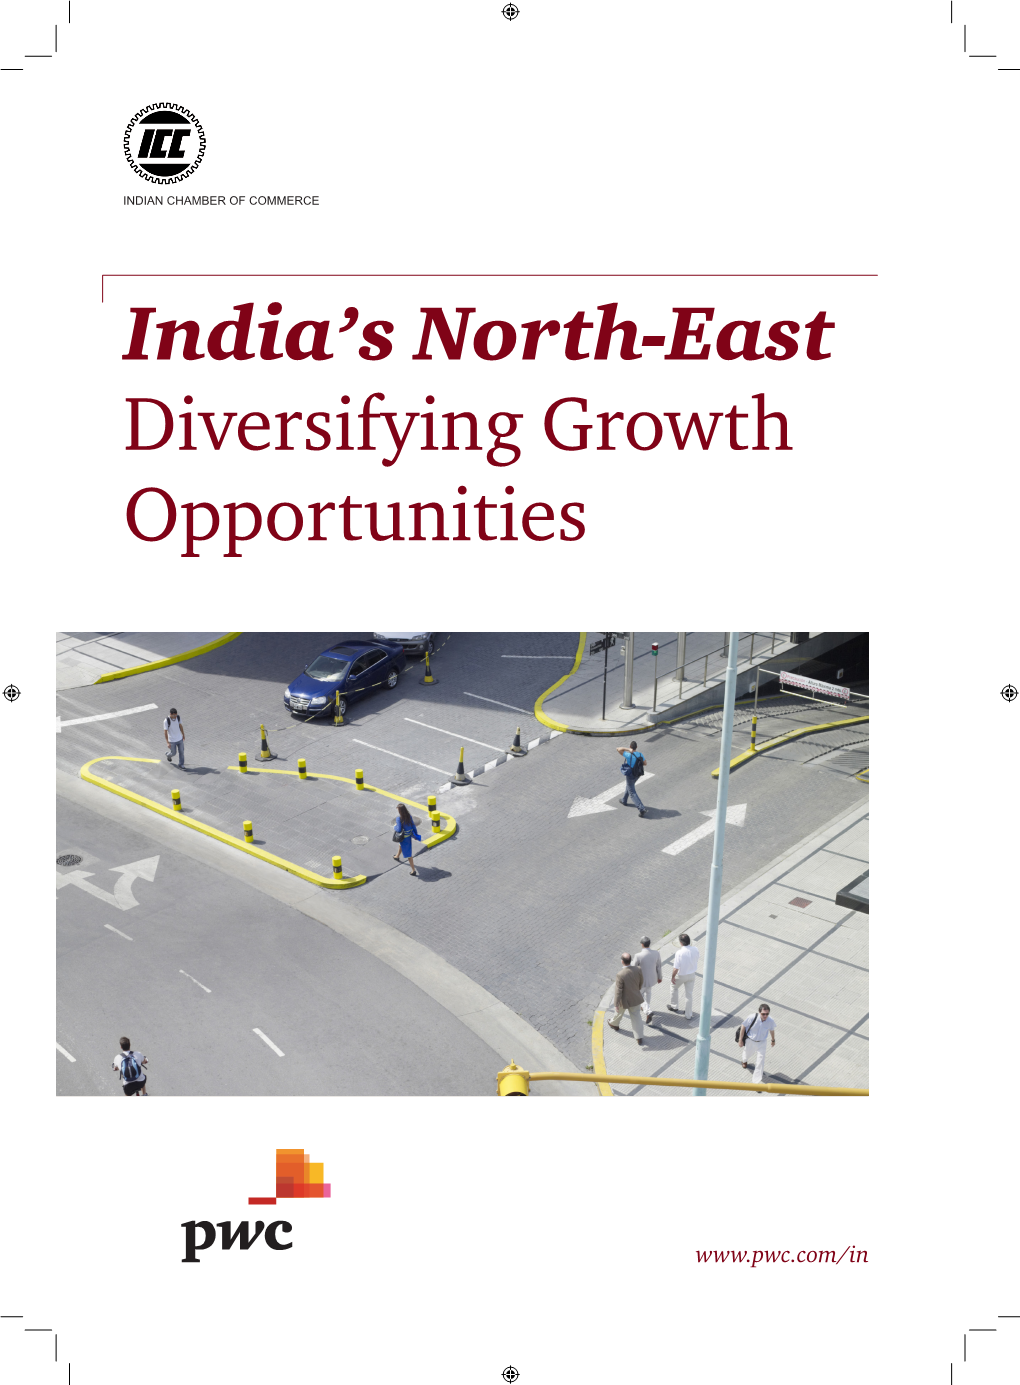 India's North-East Diversifying Growth Opportunities